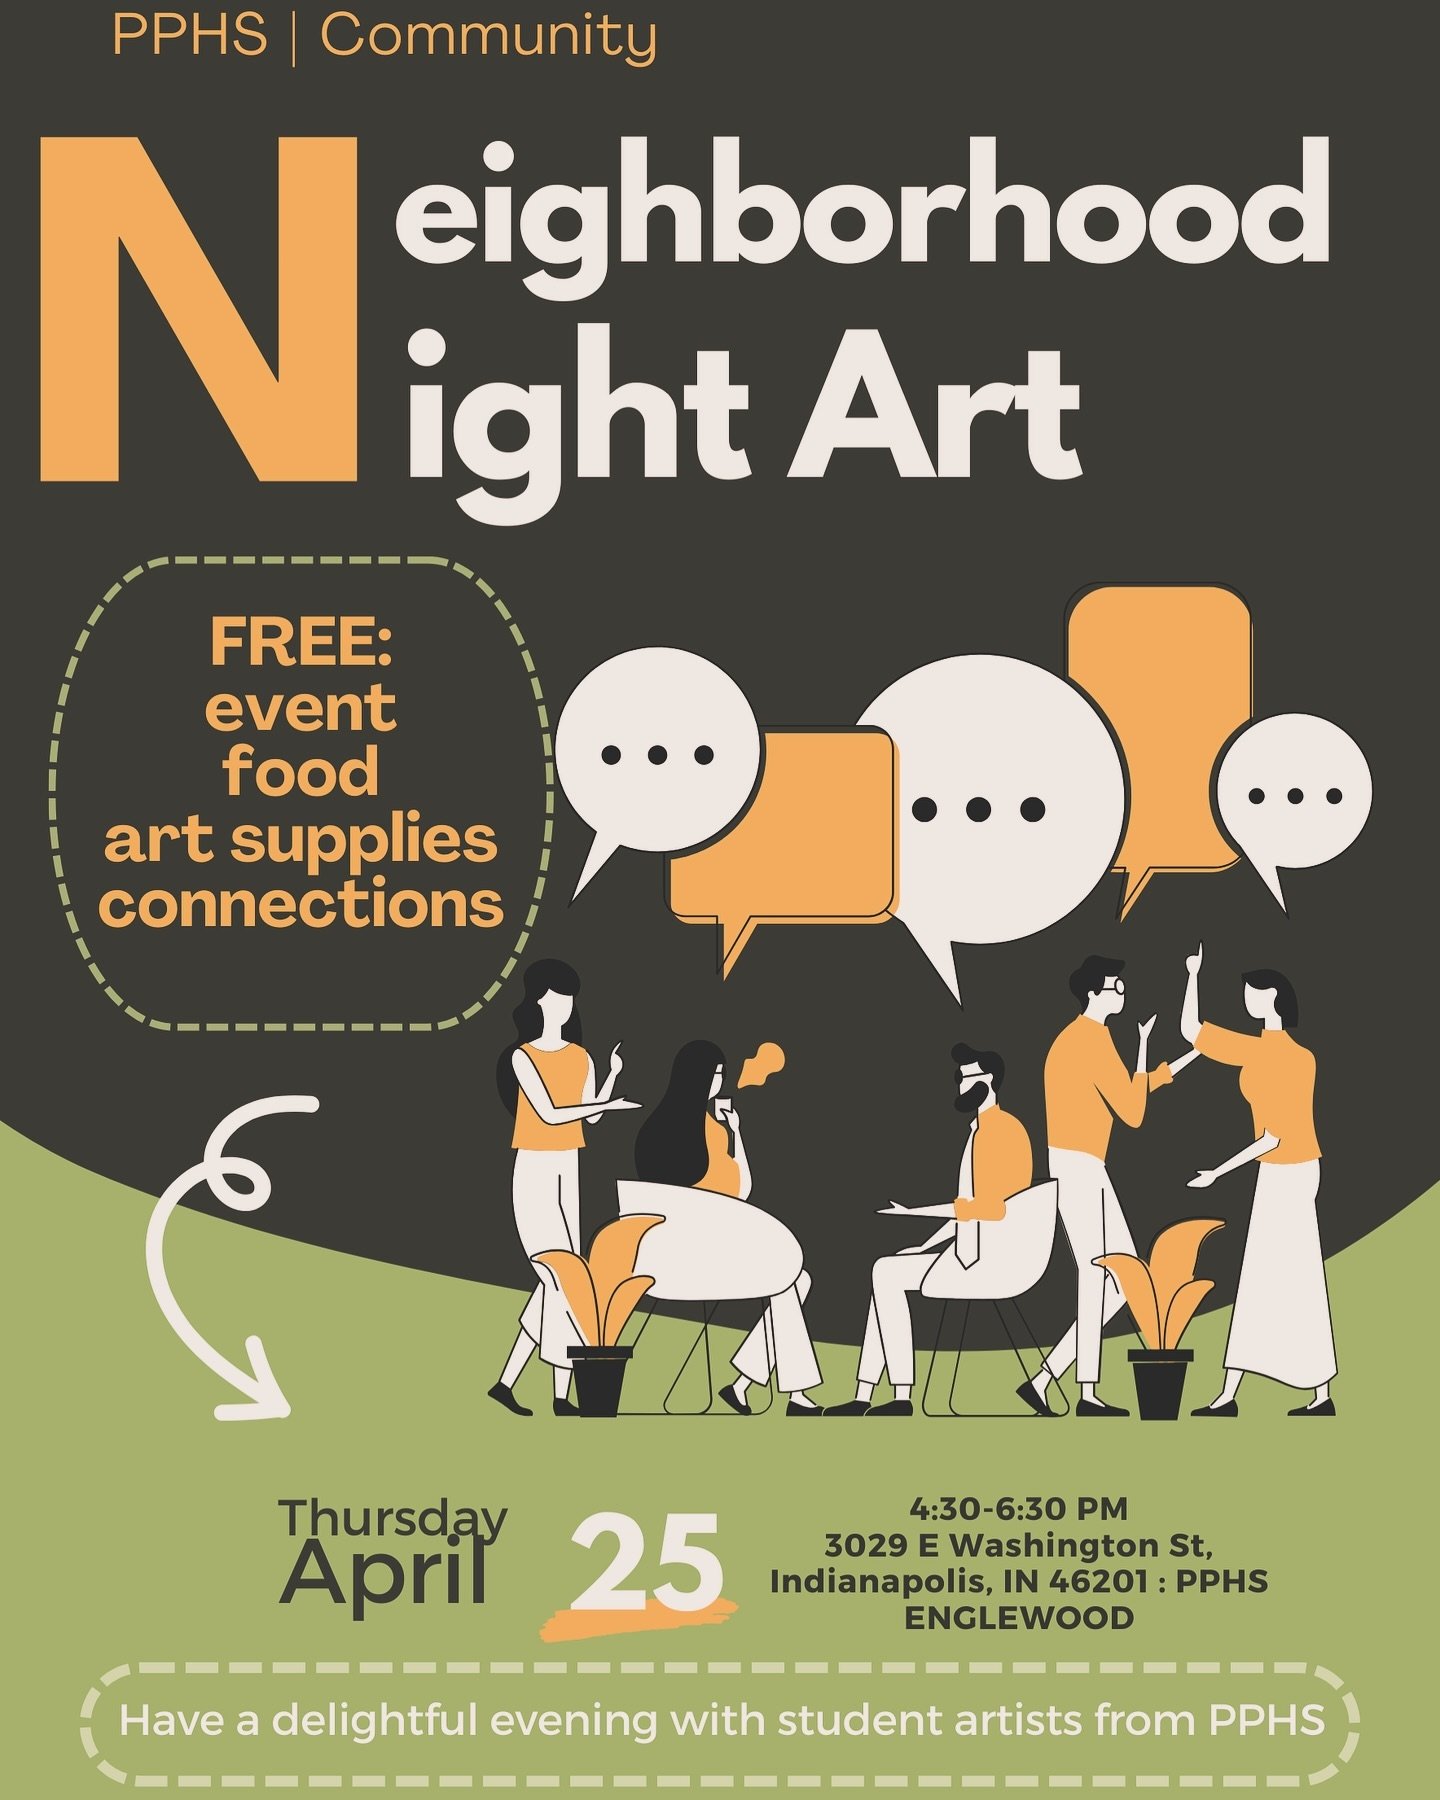 Join us tonight at Neighborhood Night Art hosted by @pphsenglewood students and staff. This event is open to the community and we look forward to seeing you there.